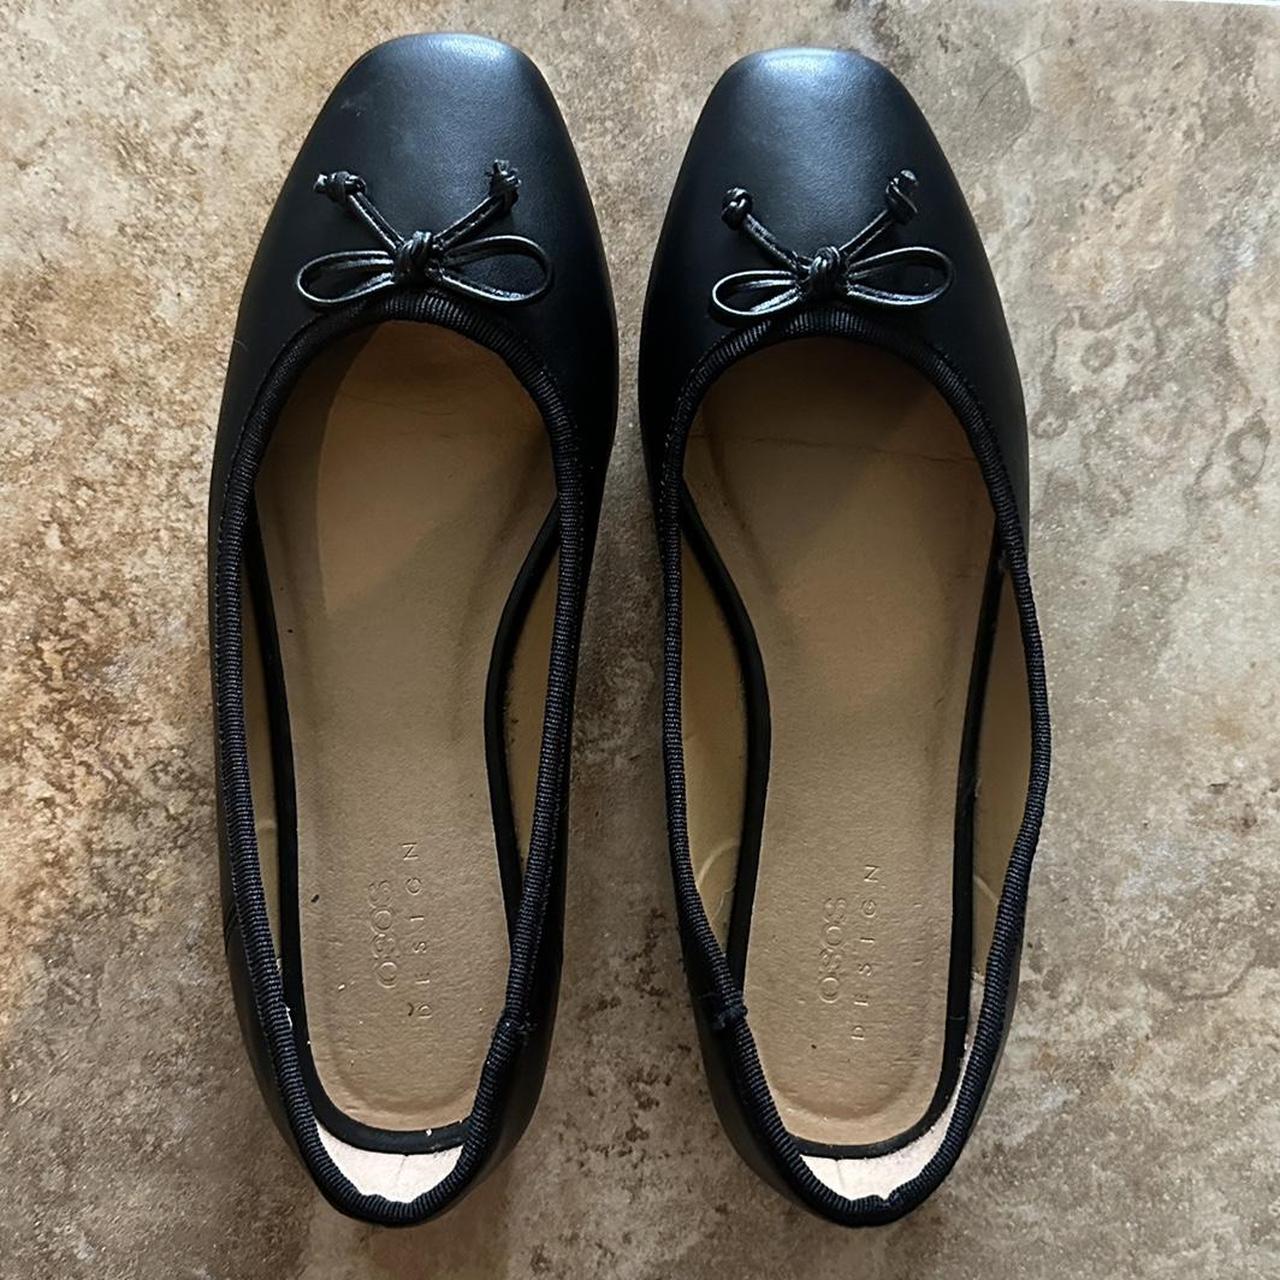 Asos balletcore flats, worn only one time Absolutely... - Depop